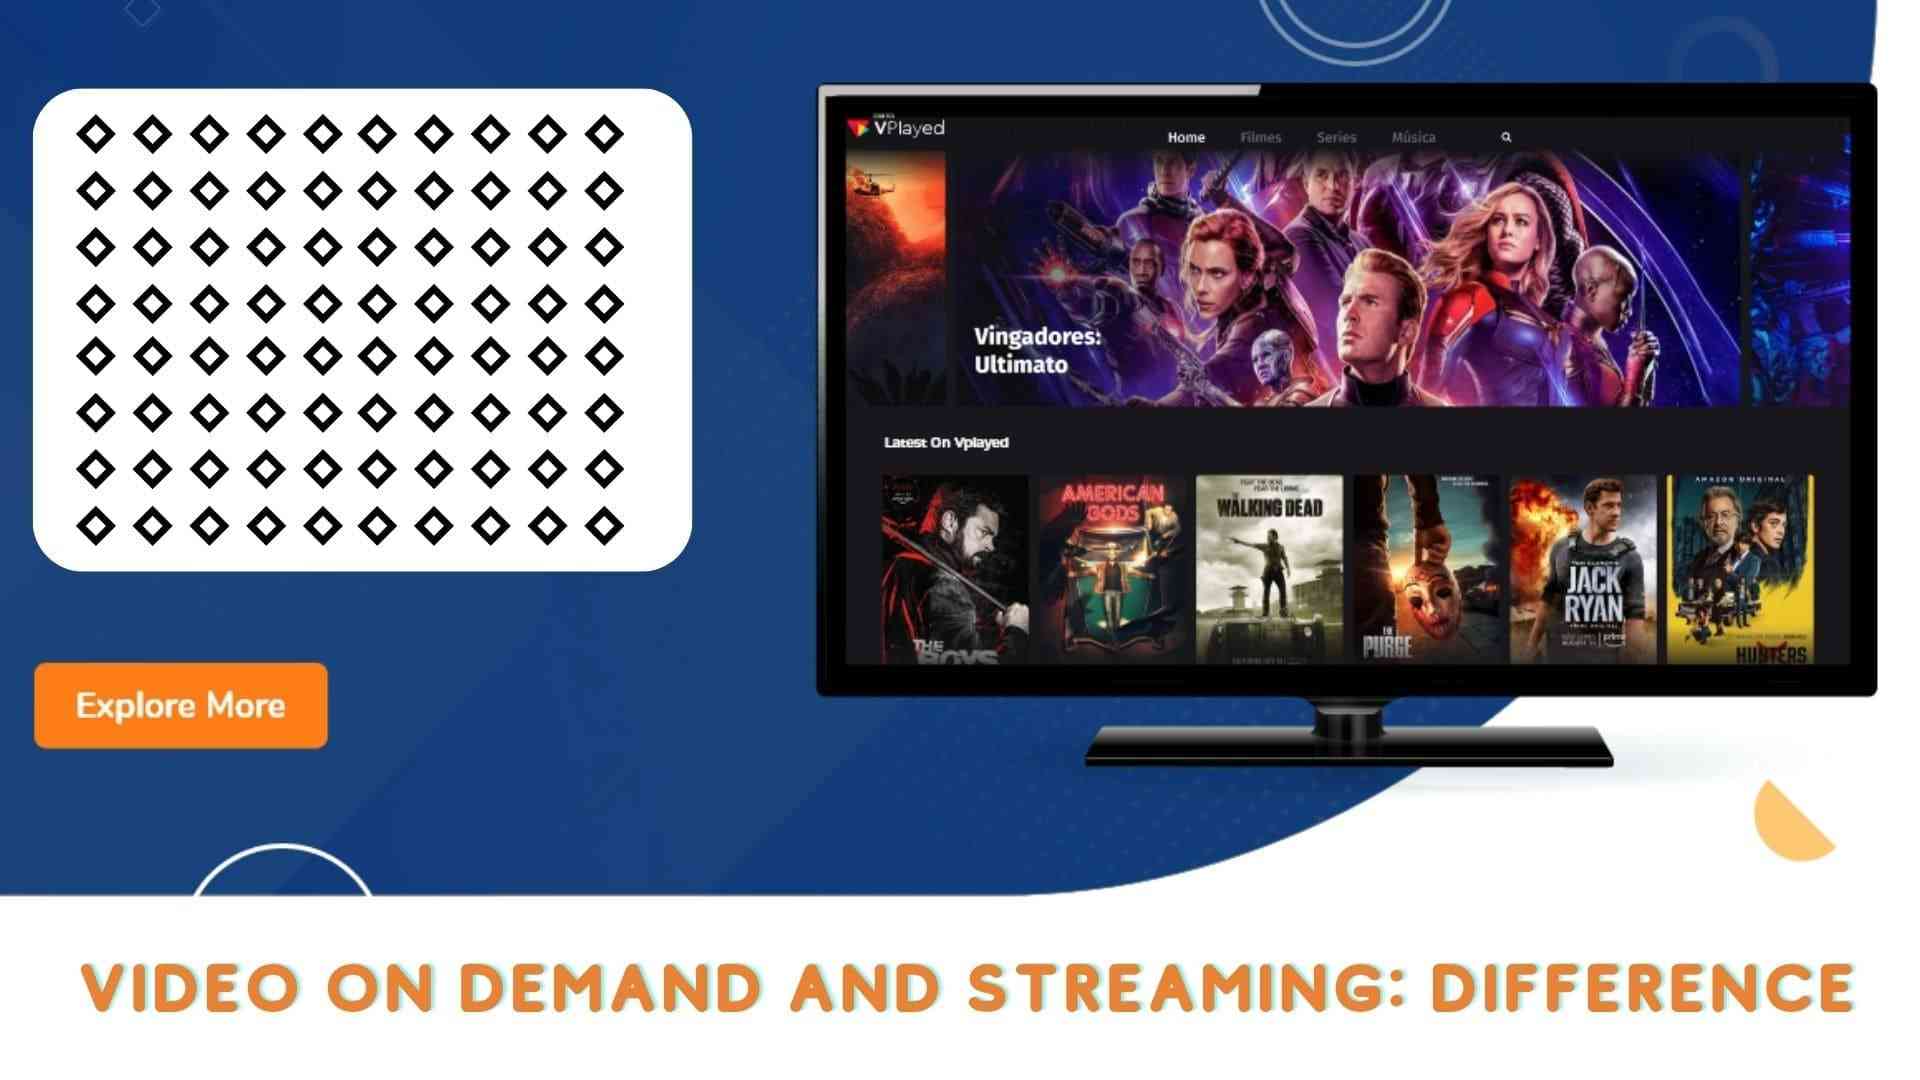 video on demand and streaming: what’s the difference